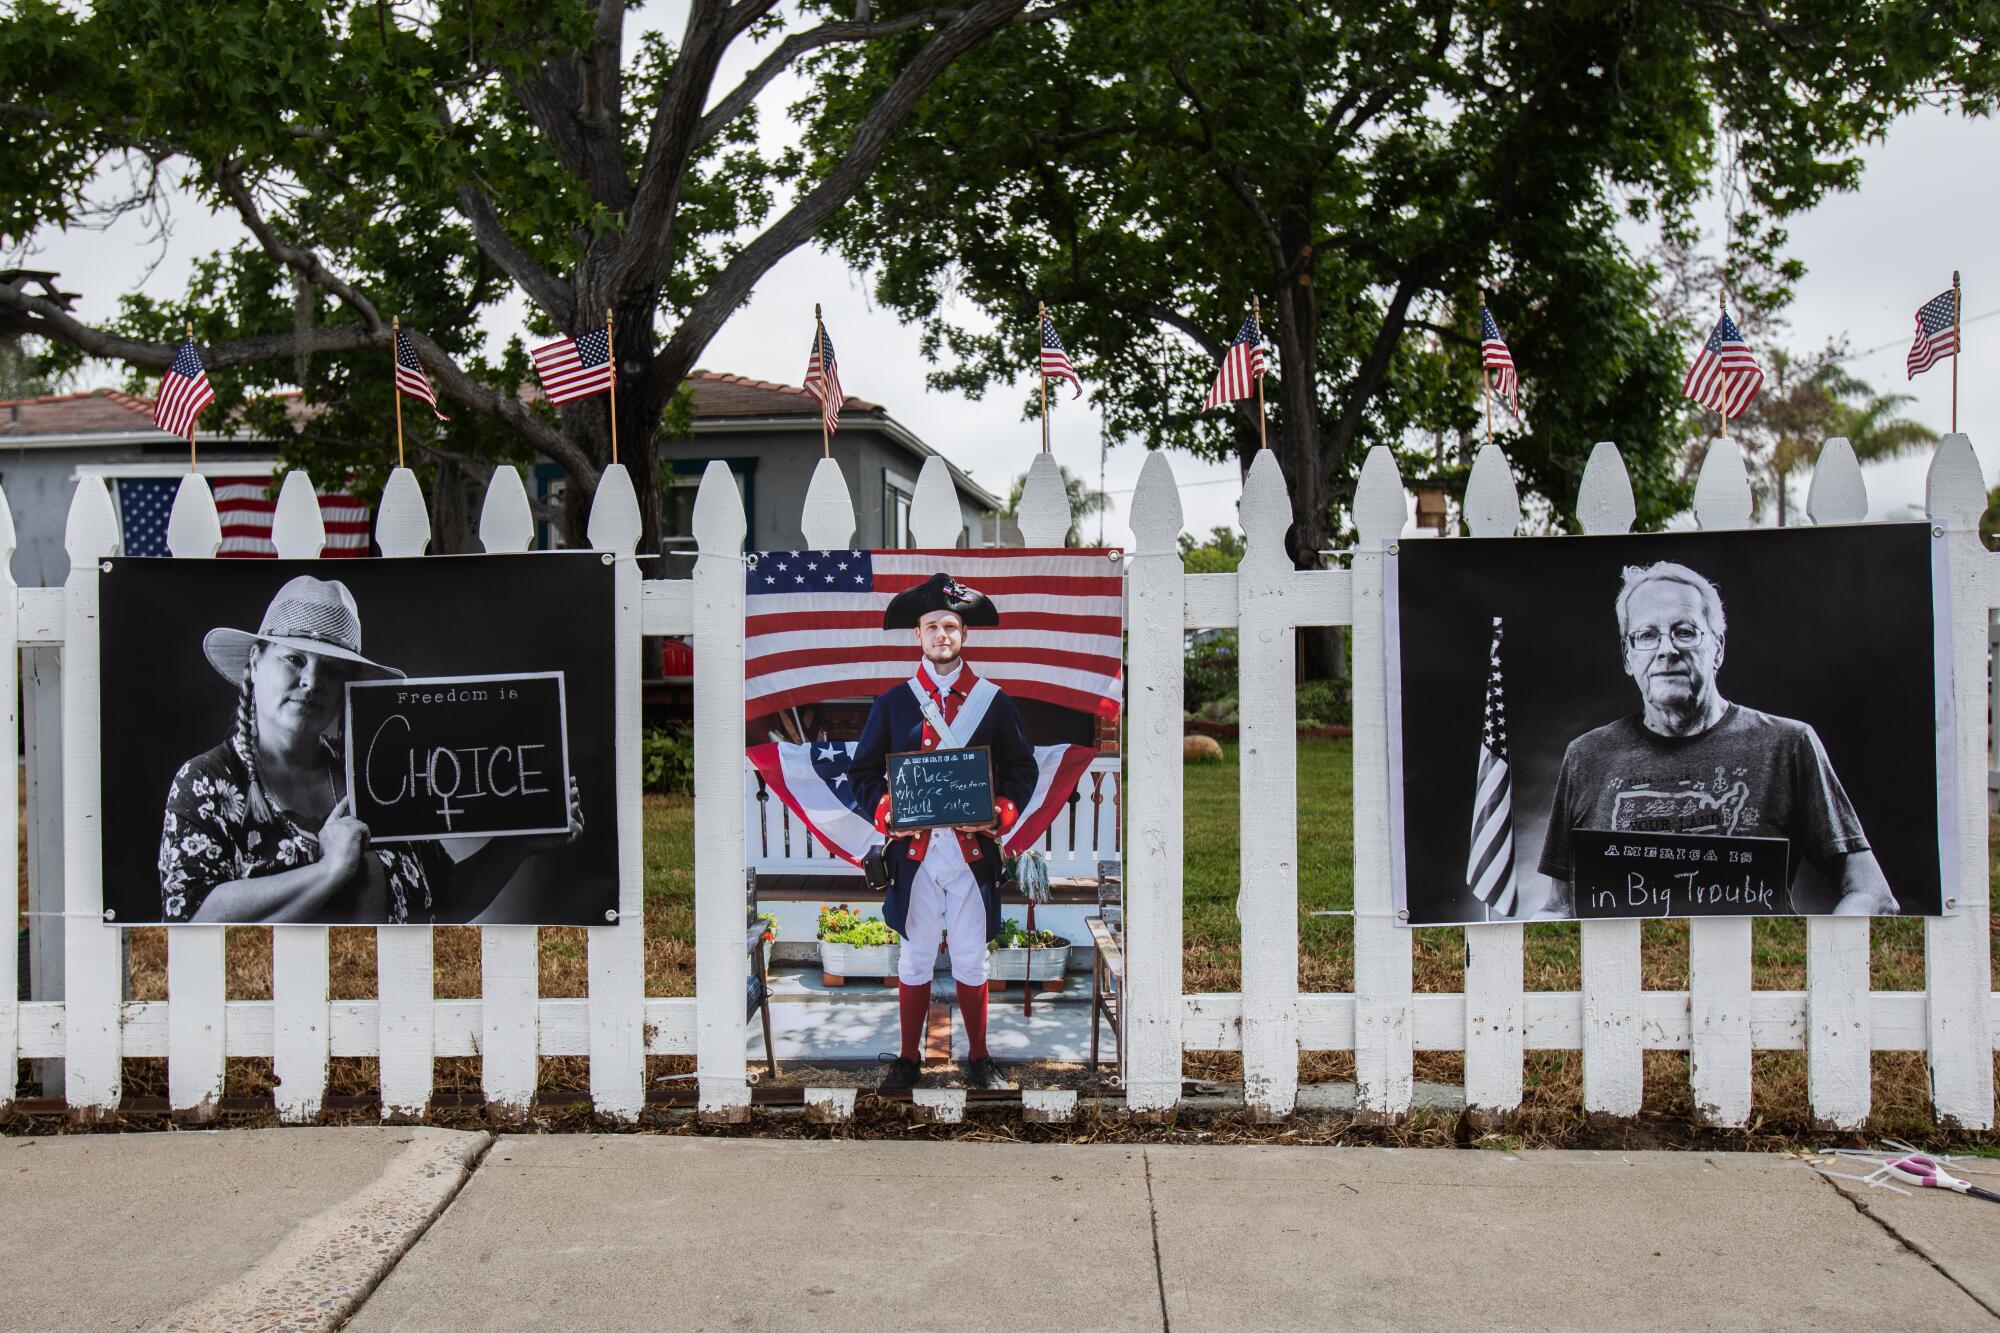 Todd Bradley hangs up portraits along a white picket fence with American flags on it